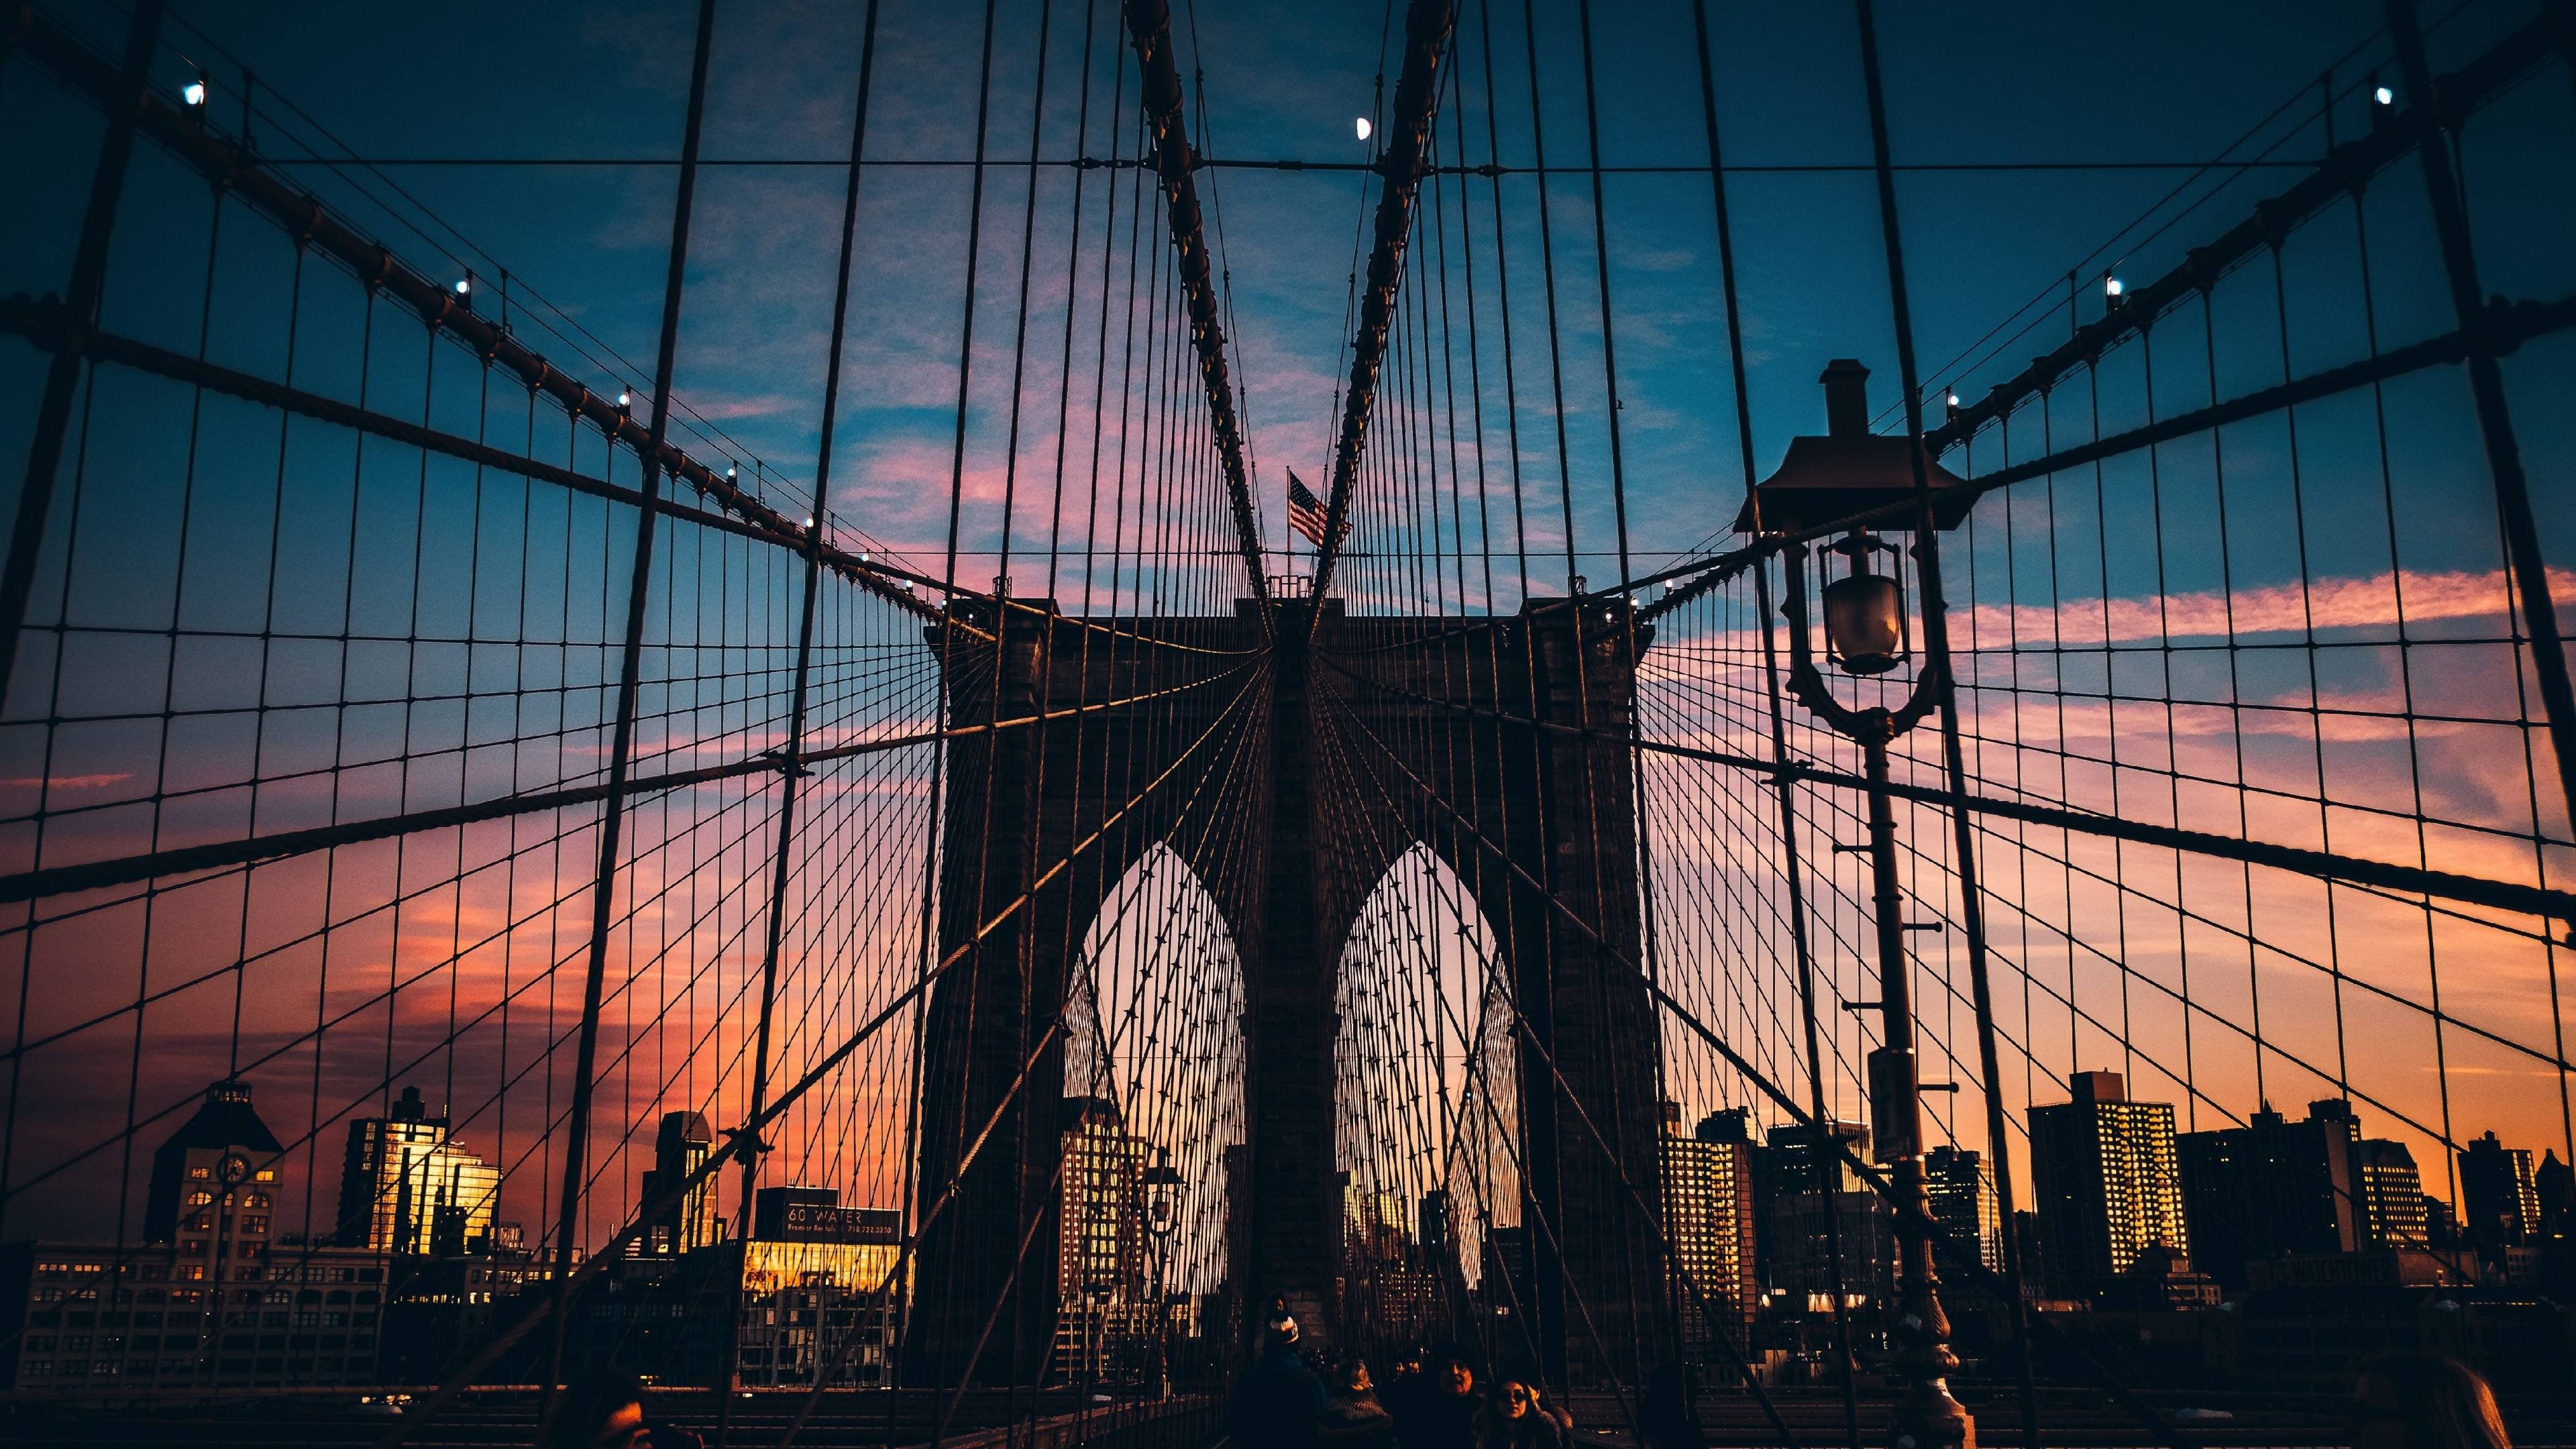 Brooklyn 4K wallpaper for your desktop or mobile screen free and easy to download